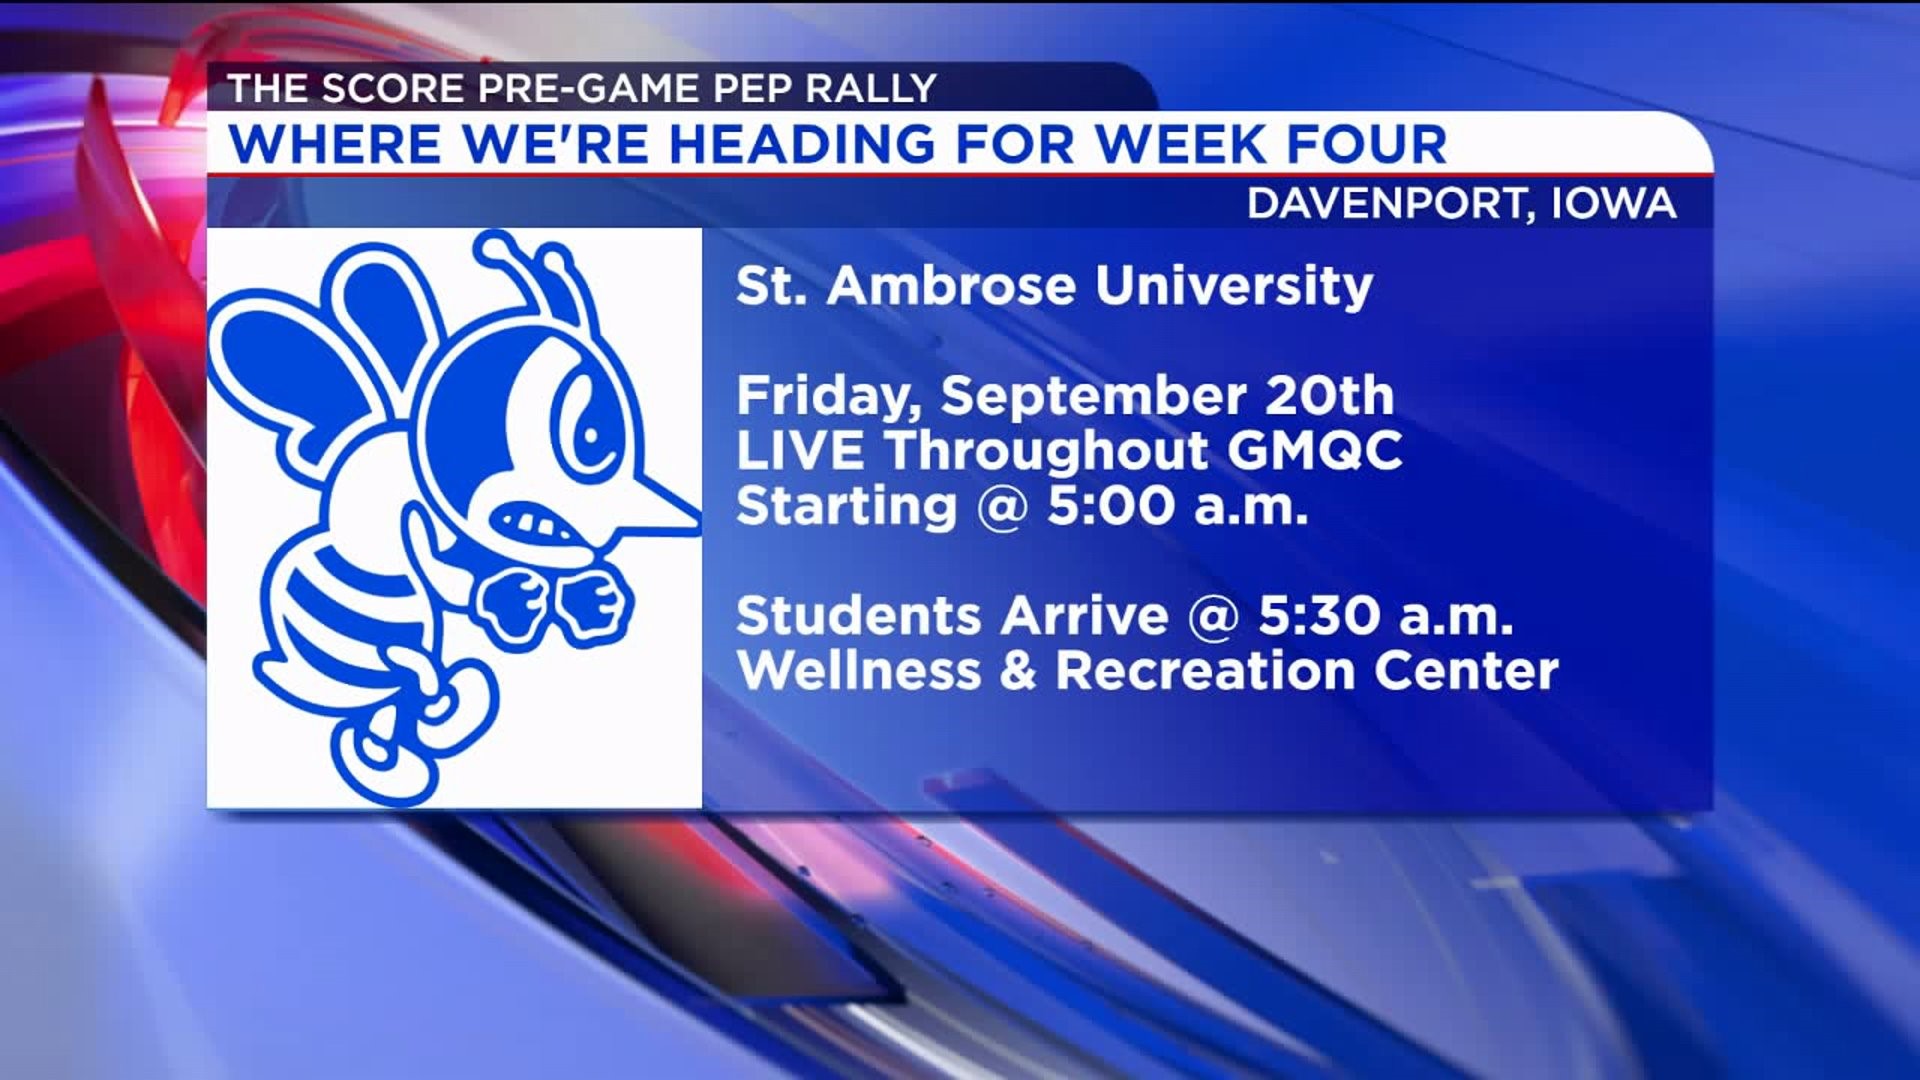 Week 4 of The Score Pre-Game Pep Rally takes us to St. Ambrose!